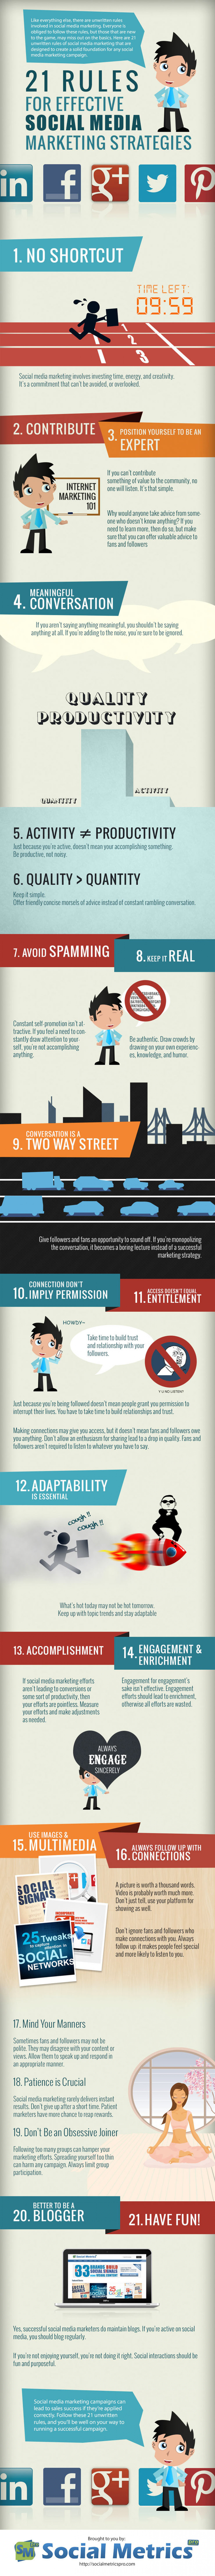 21 Rules For Effective Social Media Marketing Strategies Infographic